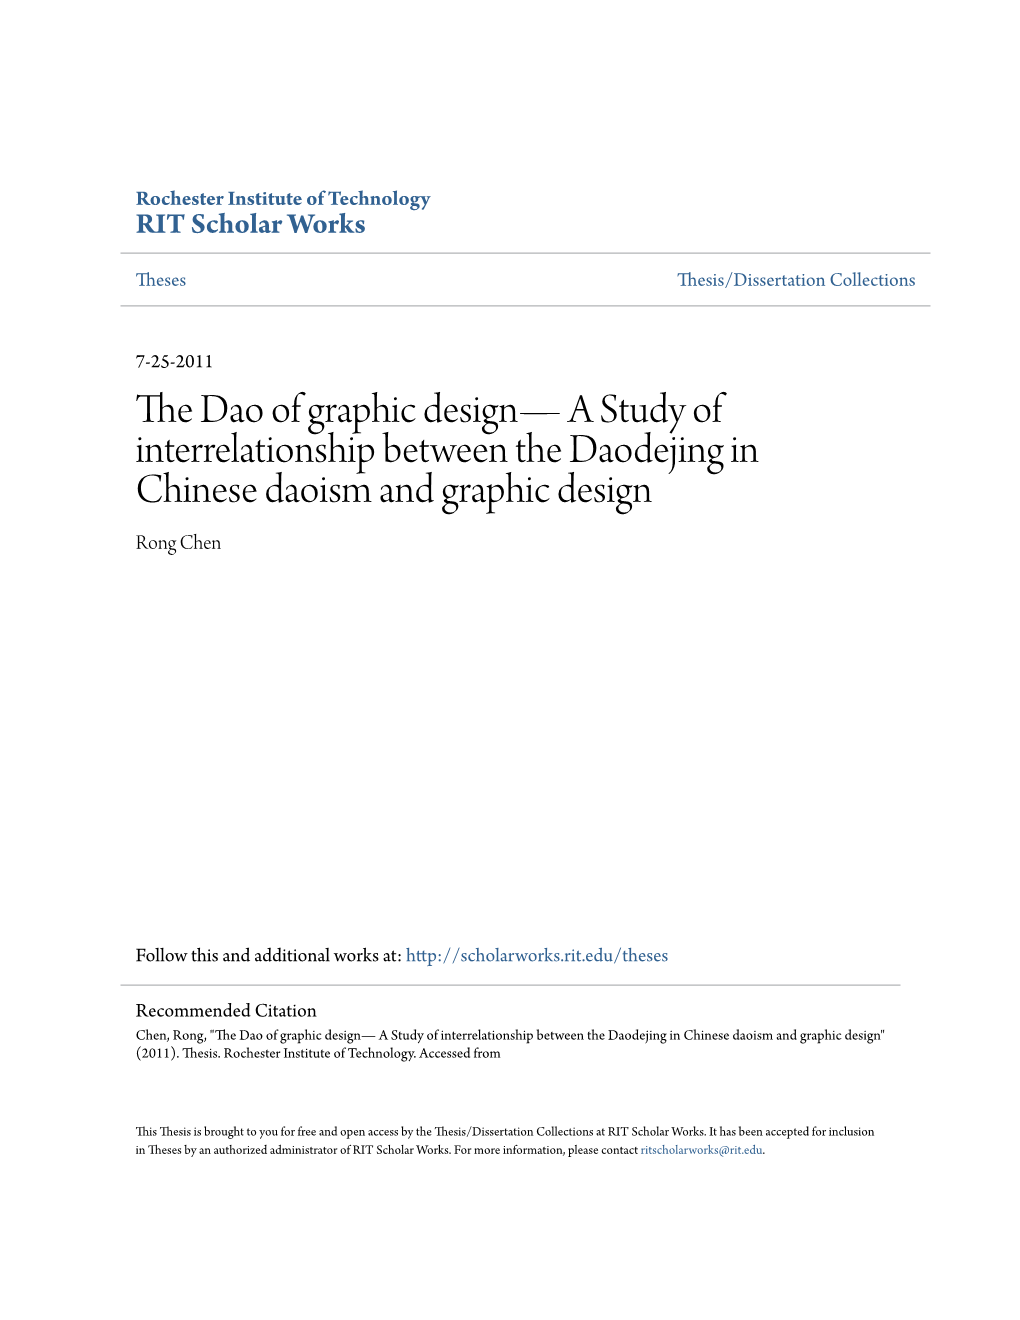 The Dao of Graphic Design — a Study of Interrelationship Between the Daodejing in Chinese Daoism and Graphic Design